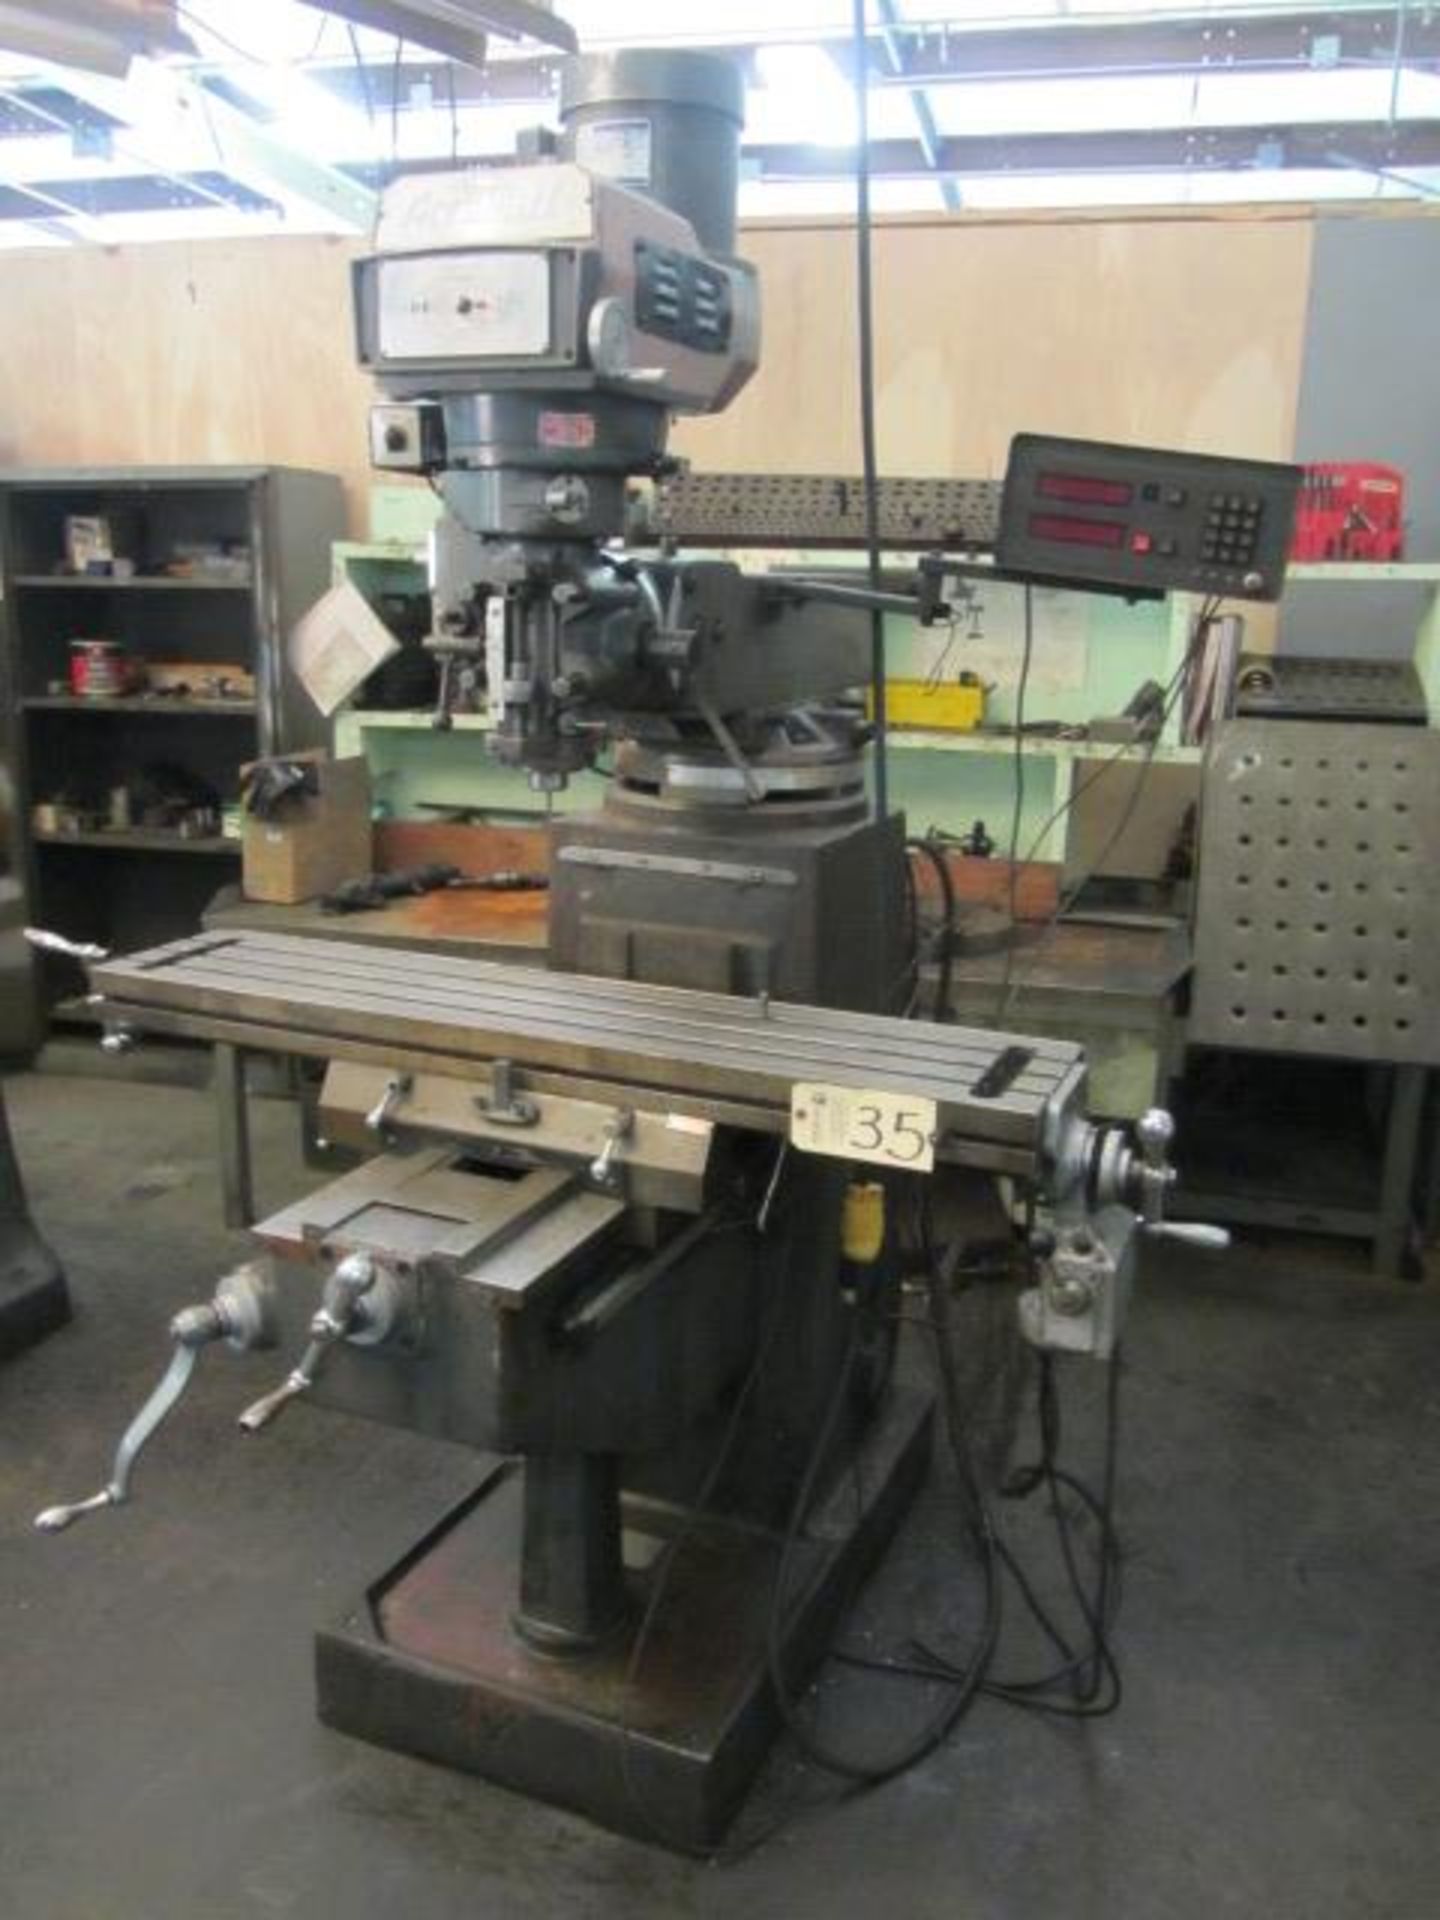 Acra Variable Speed Vertical Milling Machine with 10'' x 50'' Table, R-8 Variable Spindle Speeds - Image 2 of 6